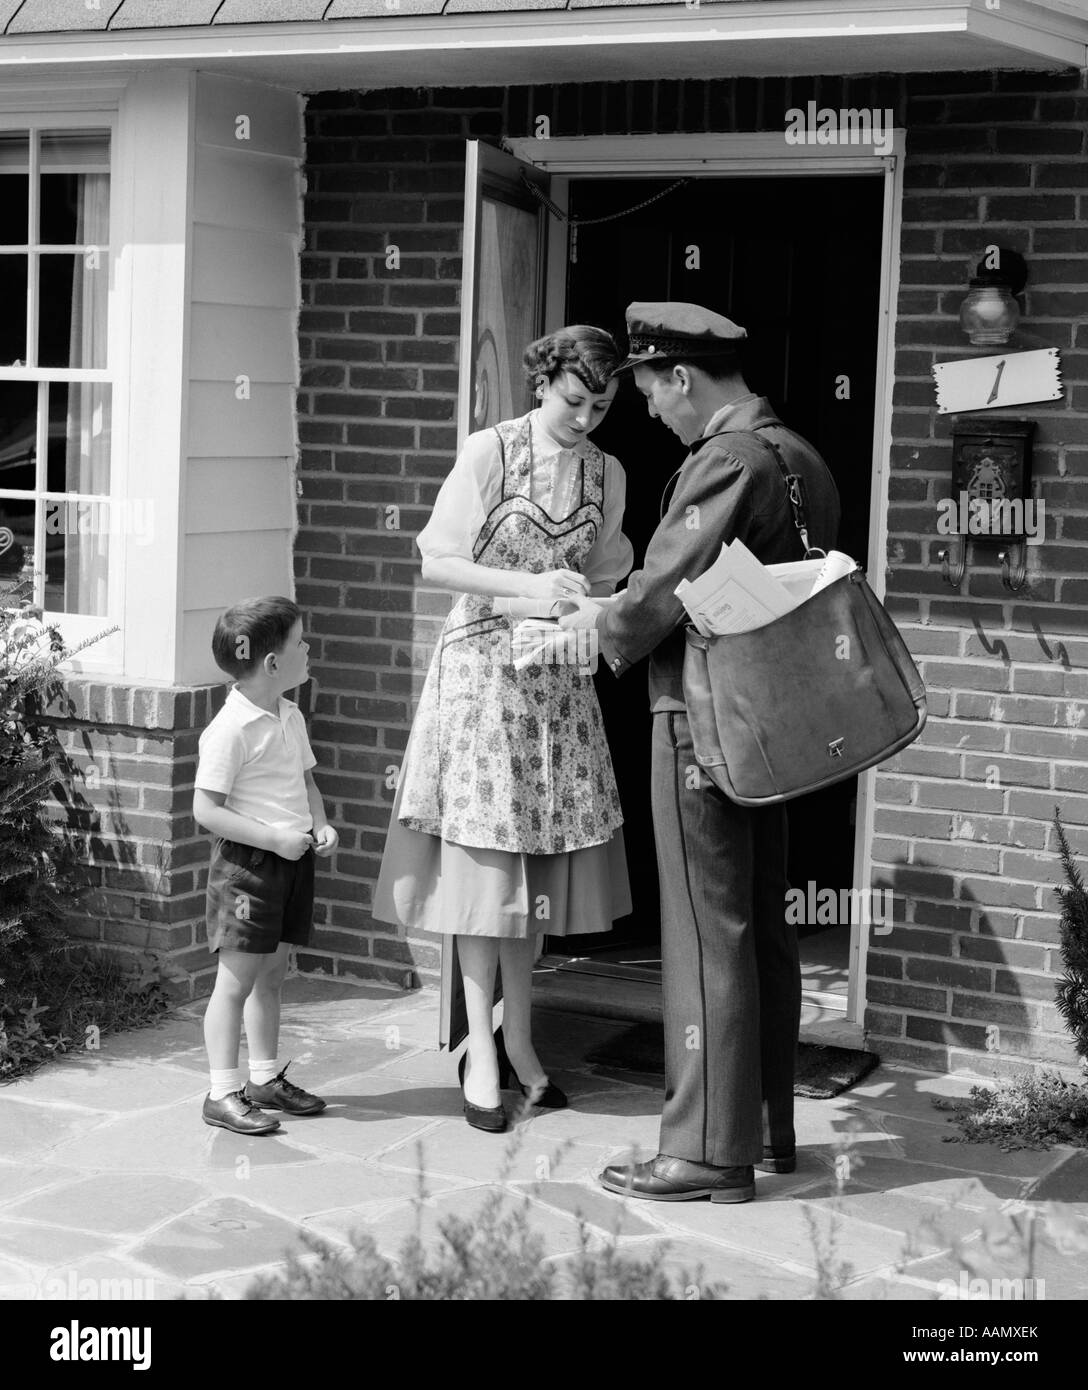 1950s SUBURBAN MOM AT HOME FRONT DOOR WITH SON WATCHING RECEIVING PACKAGE FROM MAILMAN Stock Photo